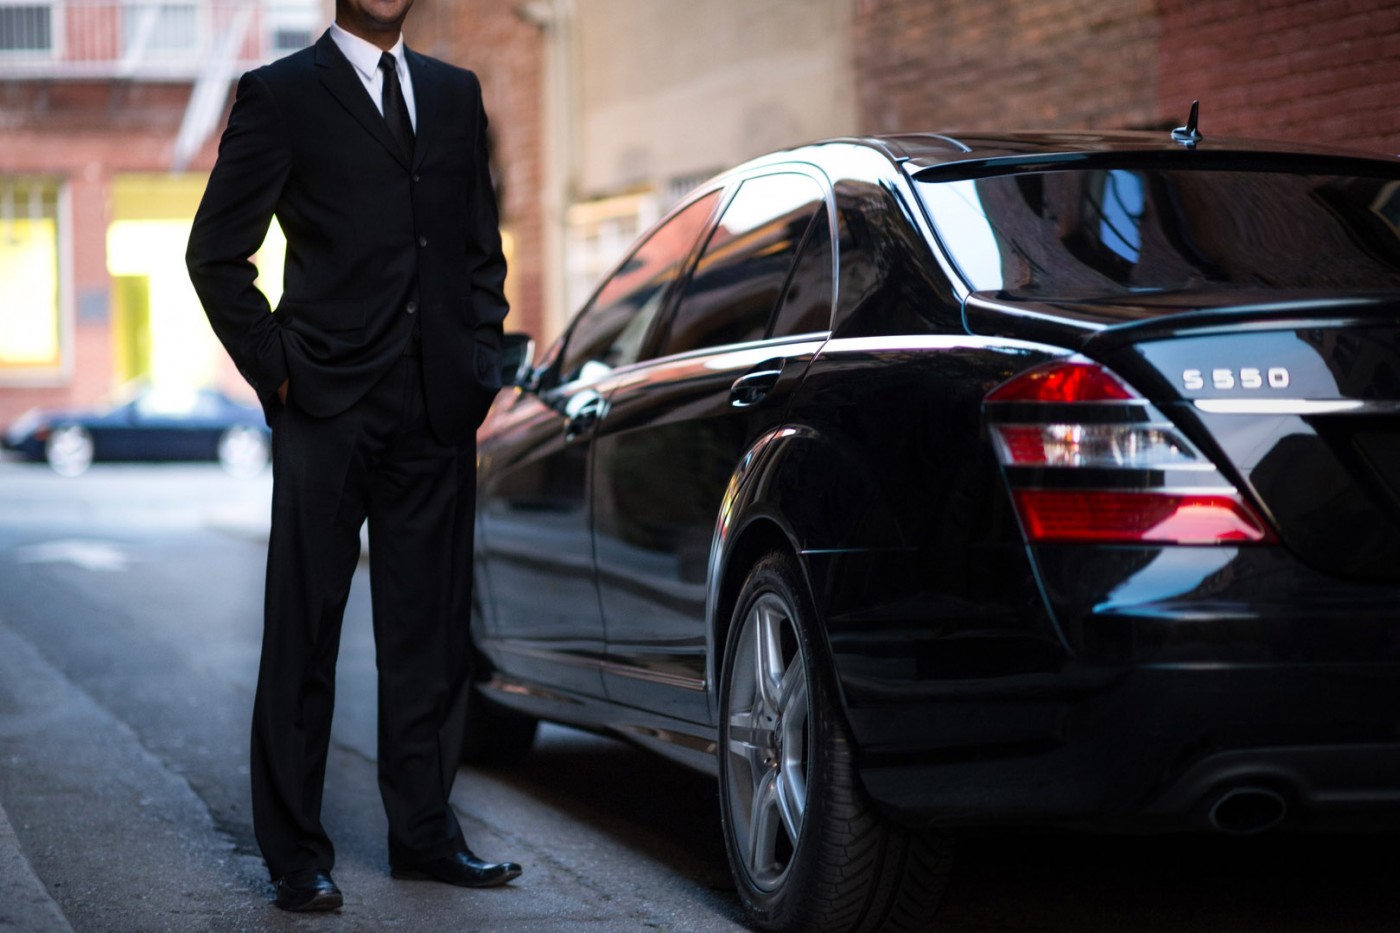 Chauffeur in a suit next to a black car